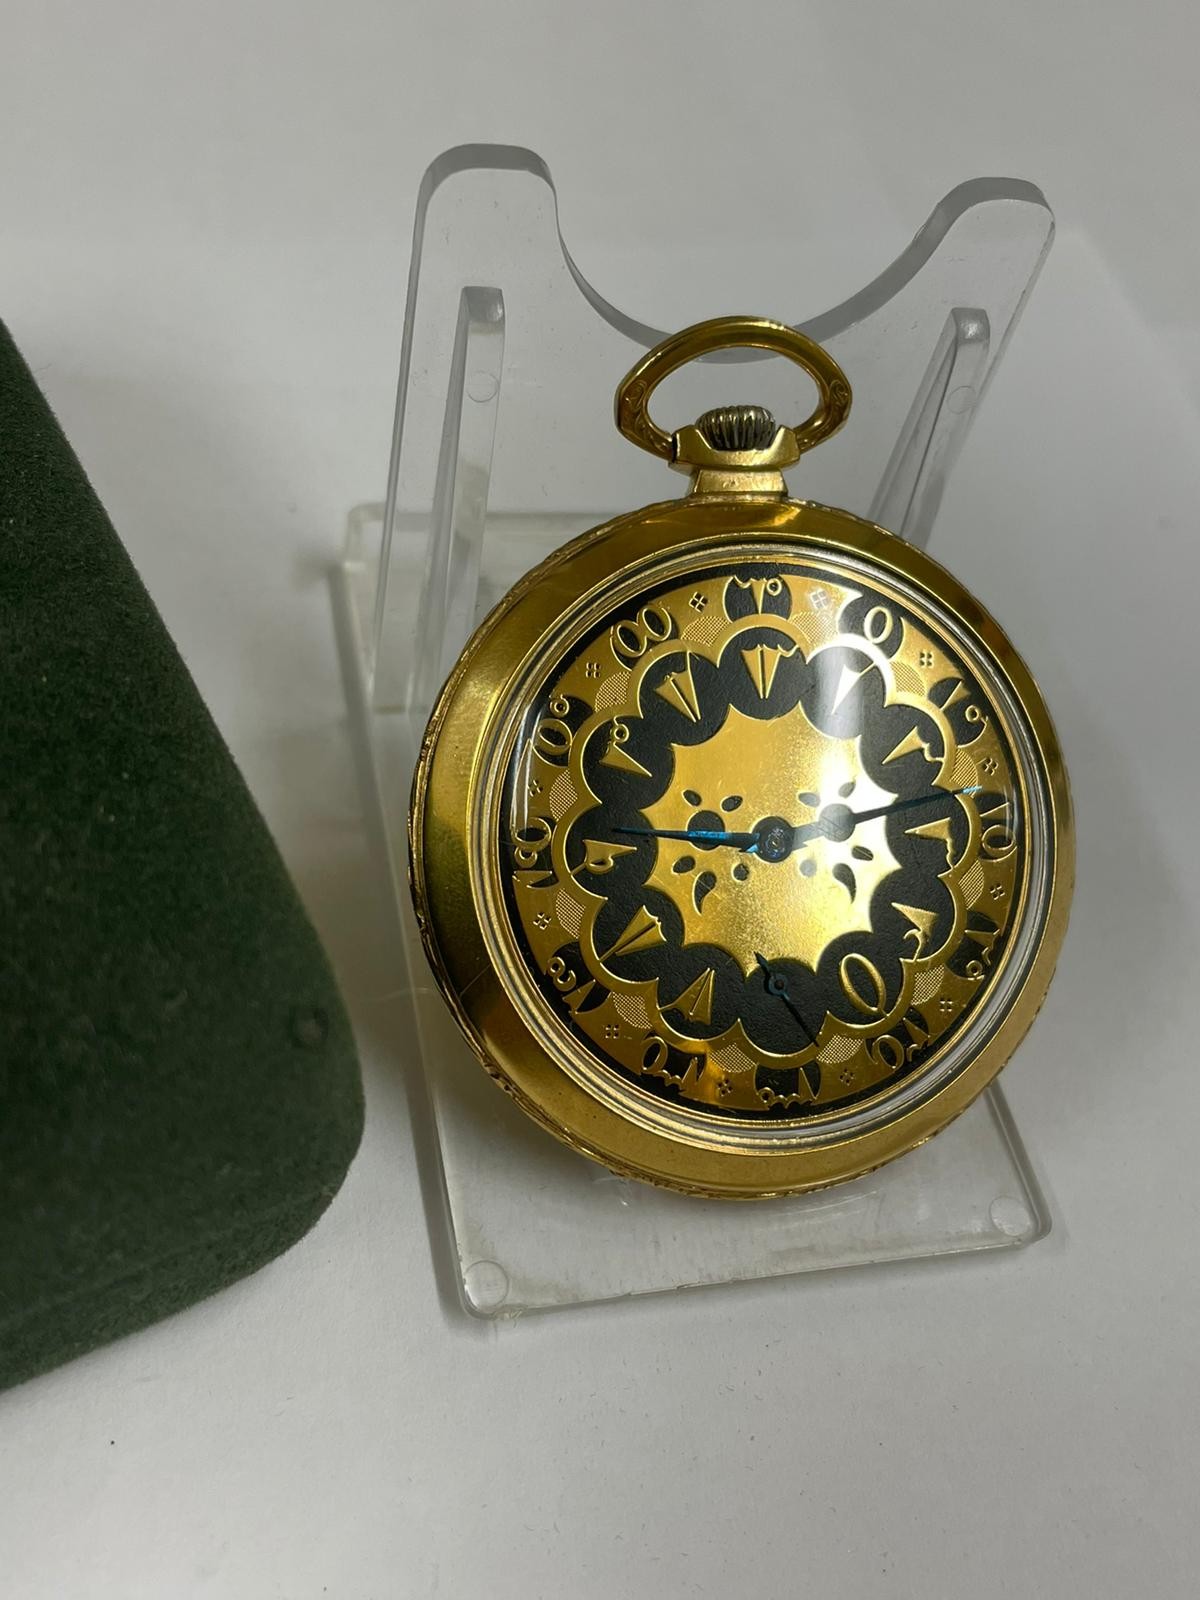 Vintage yellow metal Turkish ottoman omega pocket watch, working but sold with no guarantees - Image 7 of 10